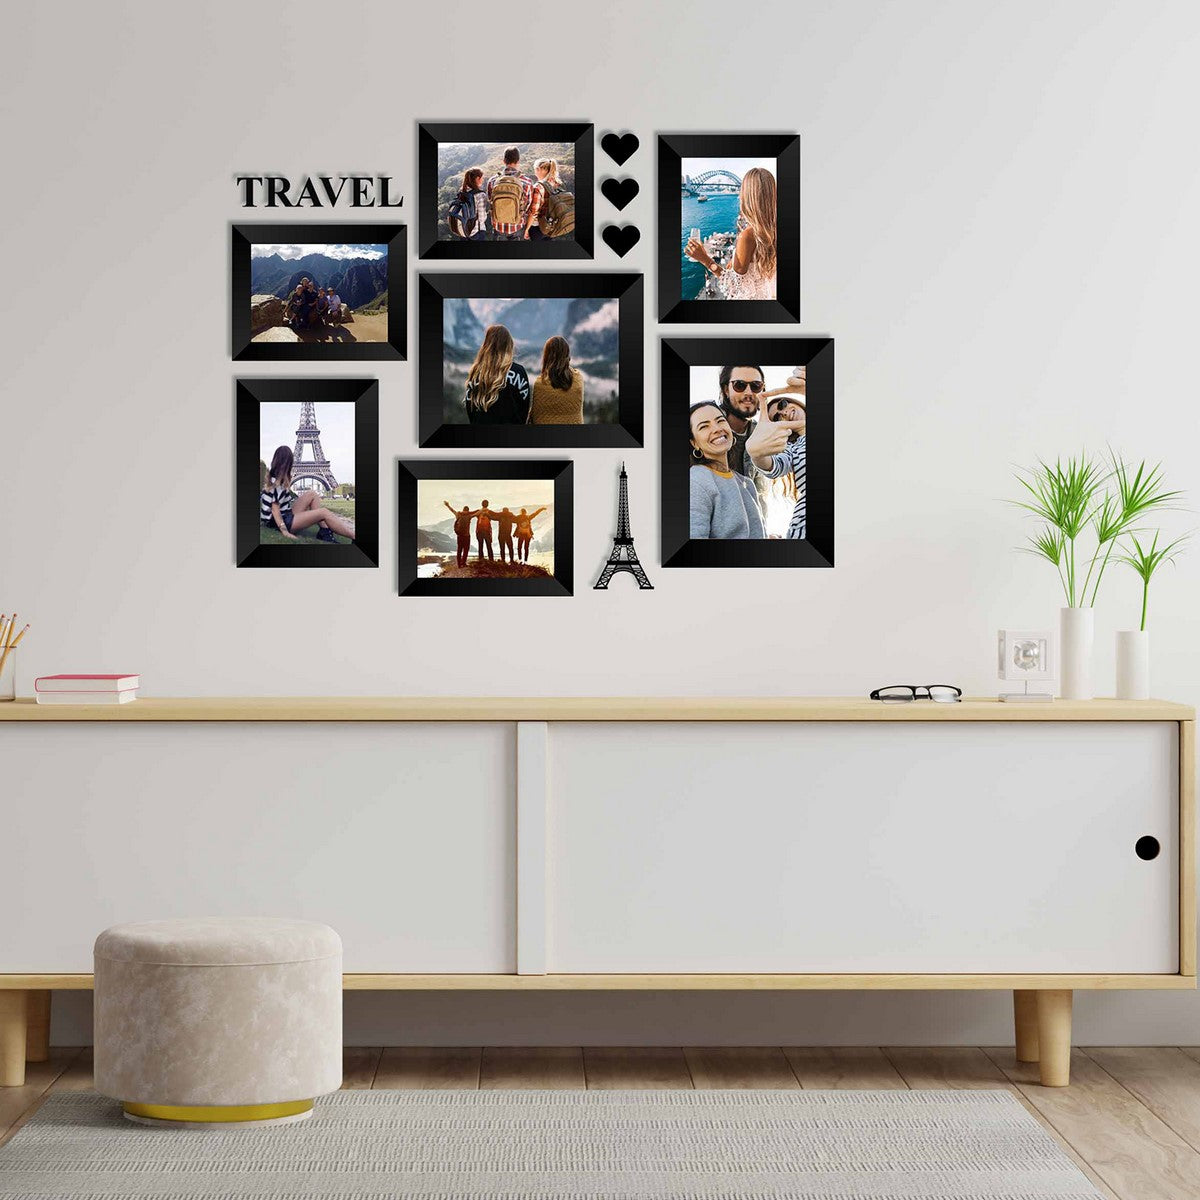 Memory Wall Collage Photo Frame - Set of 7 Photo Frames for 5 Photos of 4"x6", 2 Photos of 5"x7", 1 Piece of TRAVEL, 1 Piece of EIFFEL TOWER, 3 Pieces of HEARTS 2